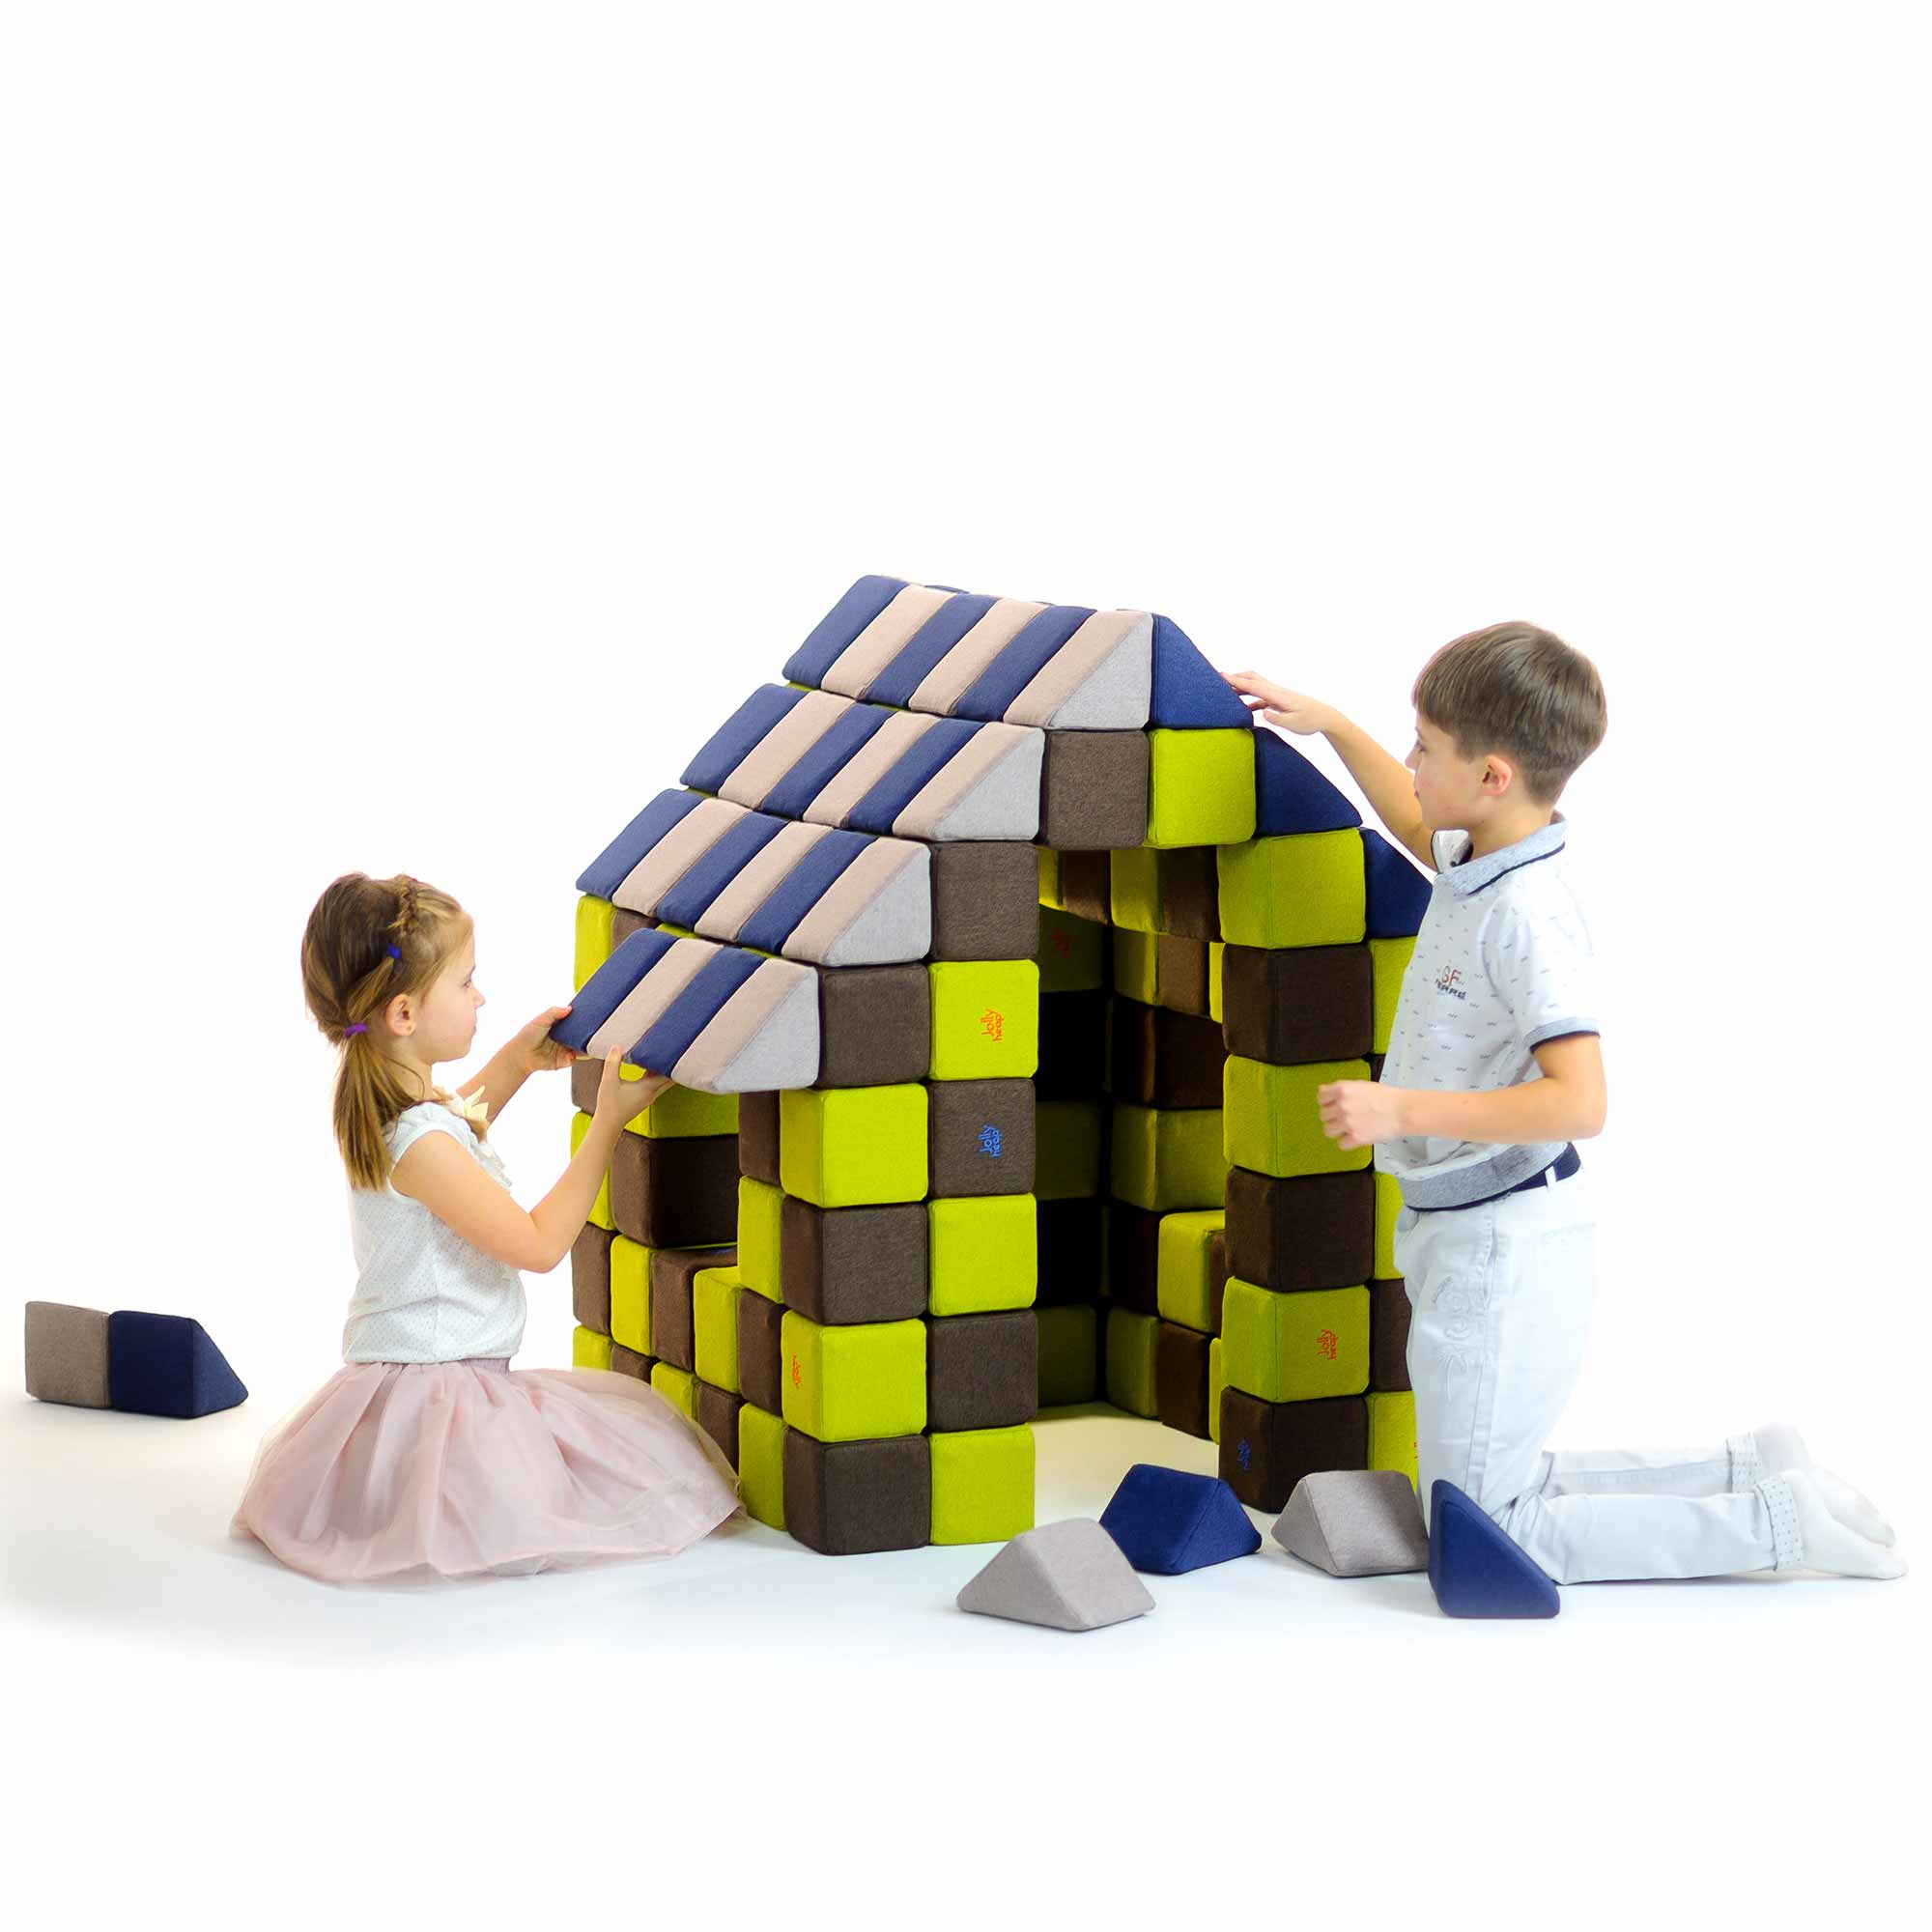 play all day with soft magnetic blocks from Jolly Heap